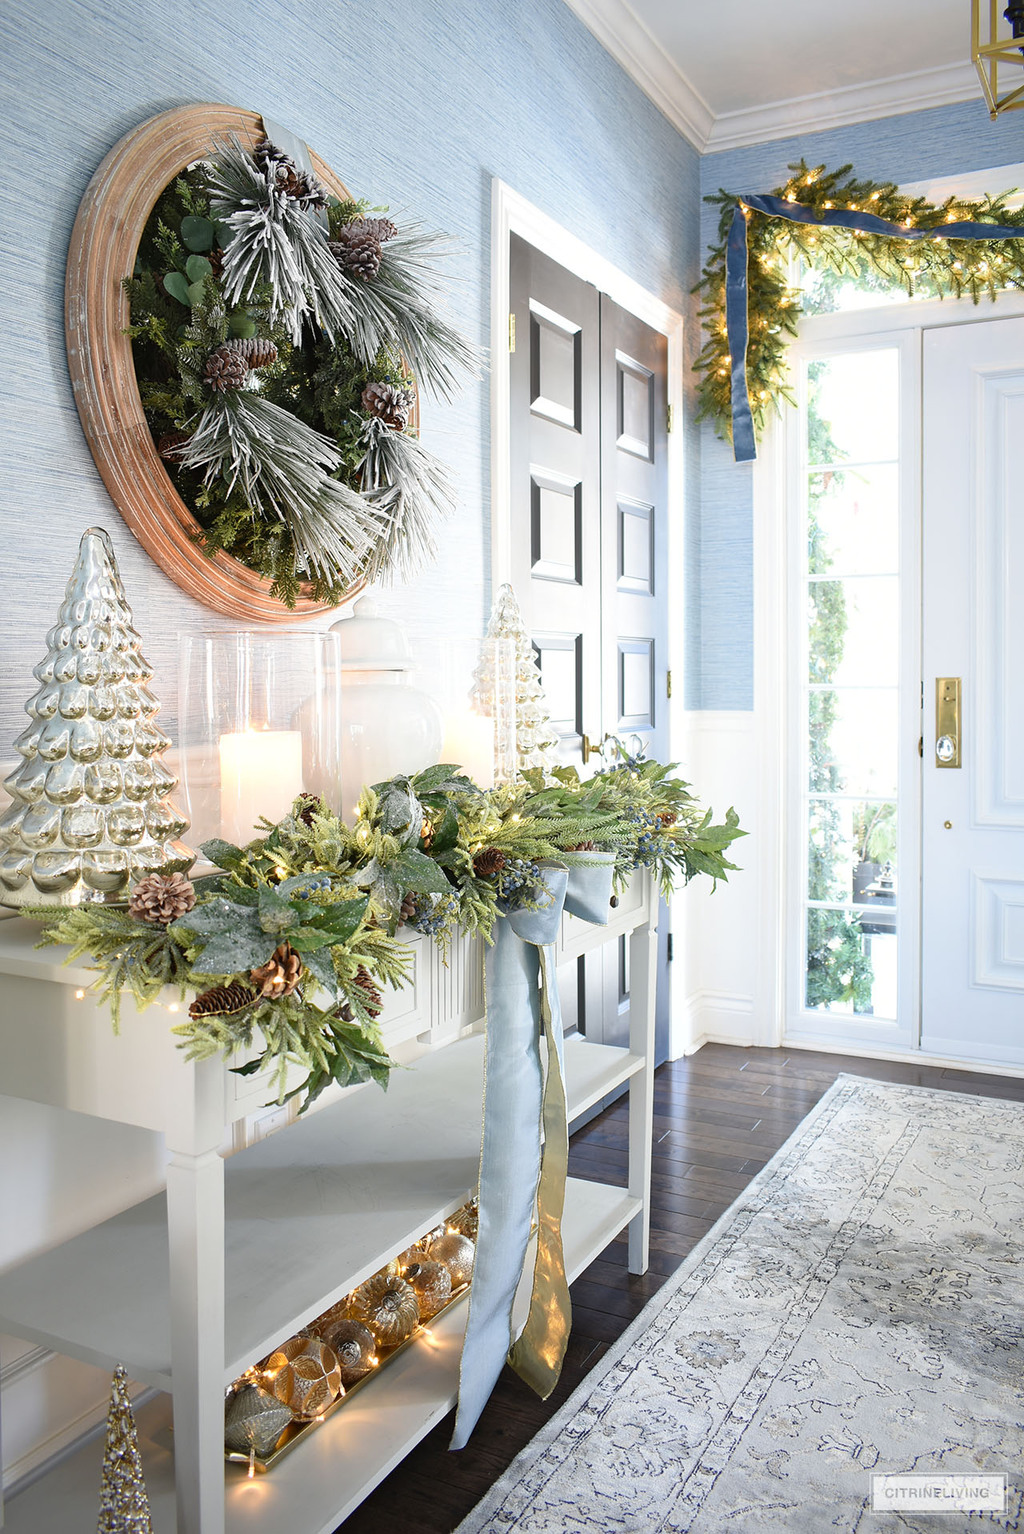 Entryway decorated for Christmas with green wreath, garlands, blue ribbons and silver and gold accessories.